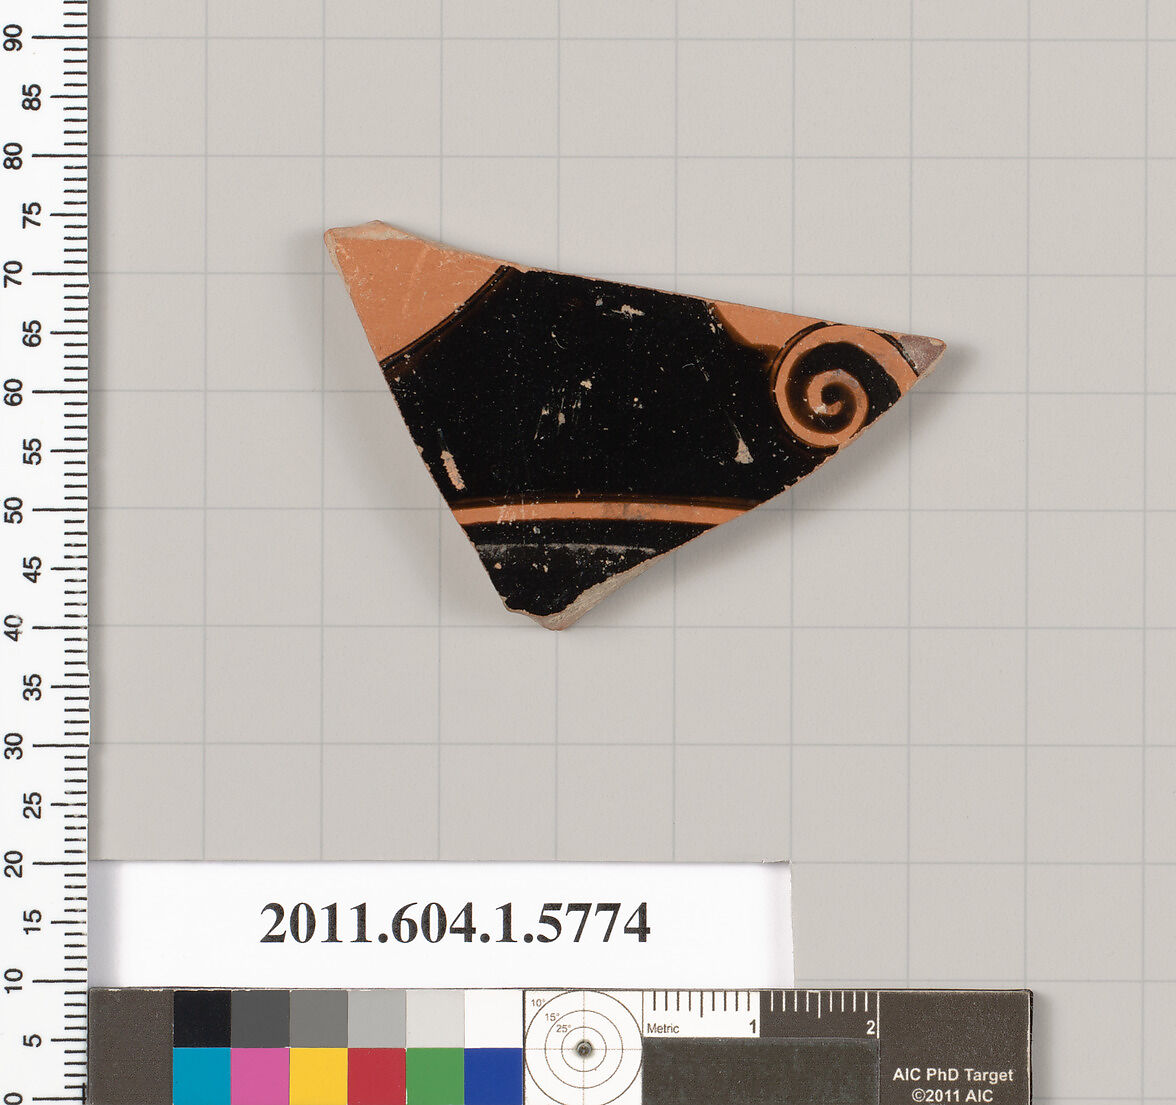 Terracotta fragment of a kylix: eye-cup  (drinking cup), Attributed to Oltos [DvB], Terracotta, Greek, Attic 